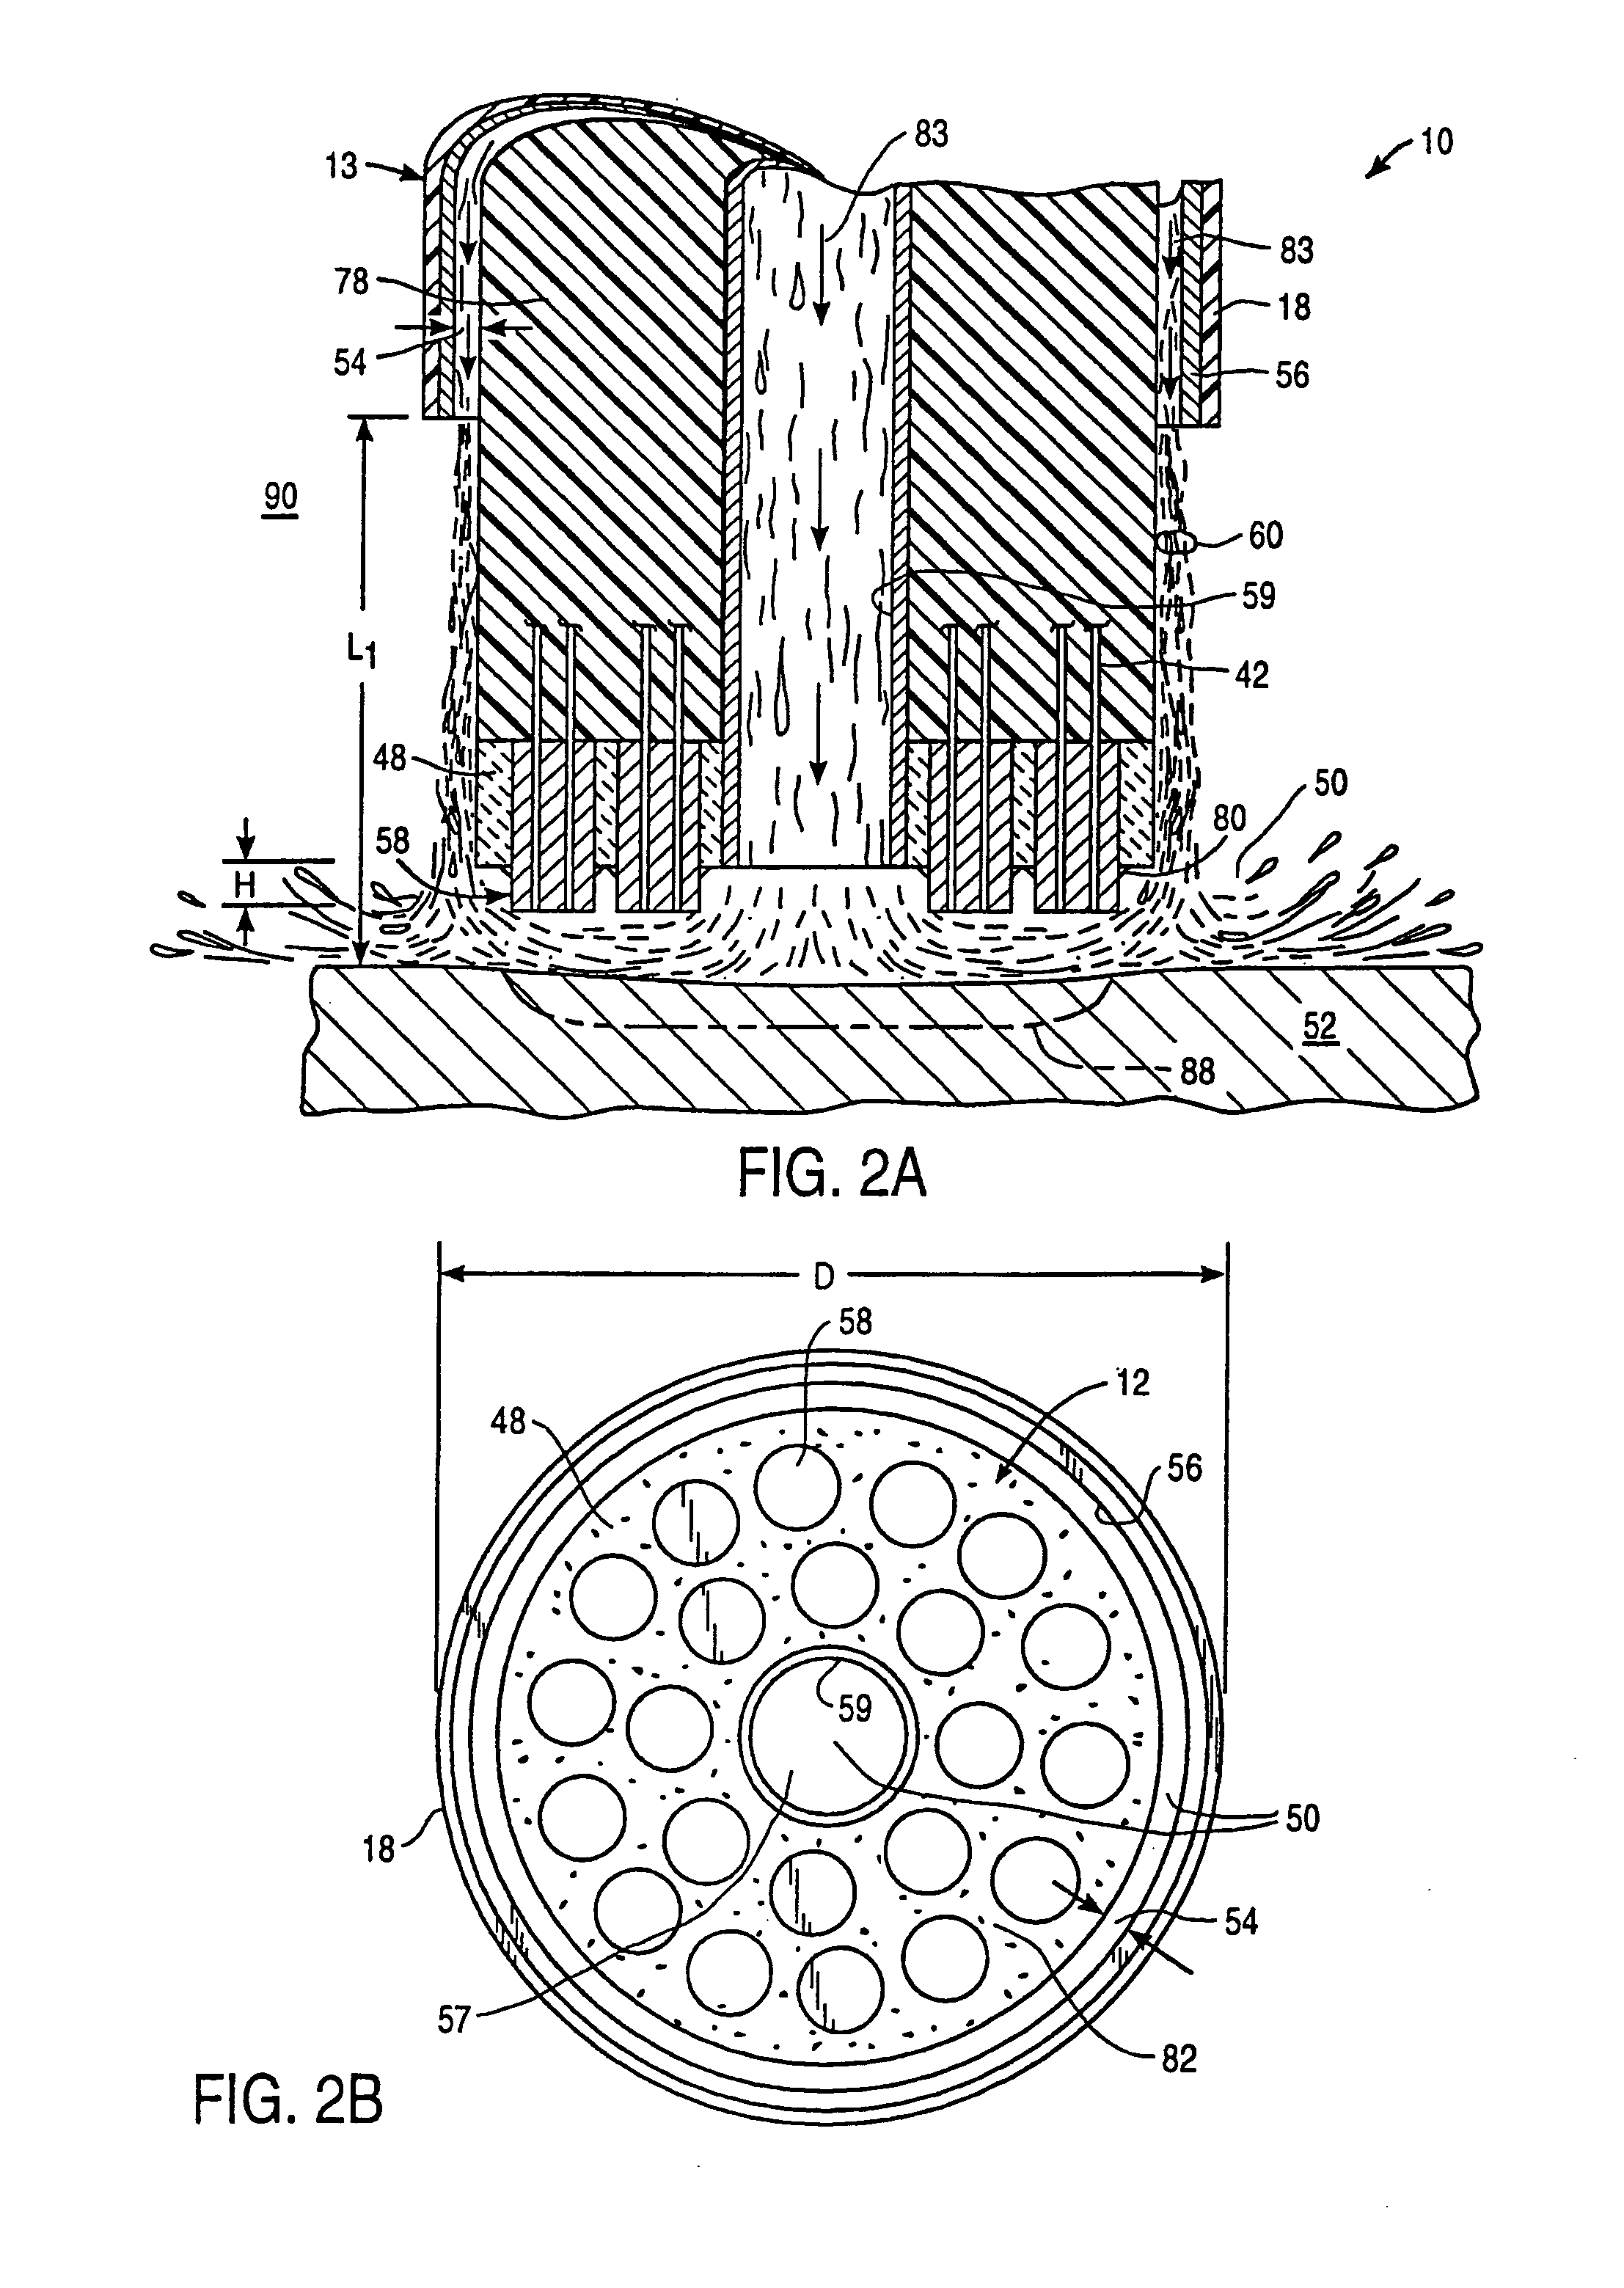 Method for electrosurgical tissue treatment near a patient's heart